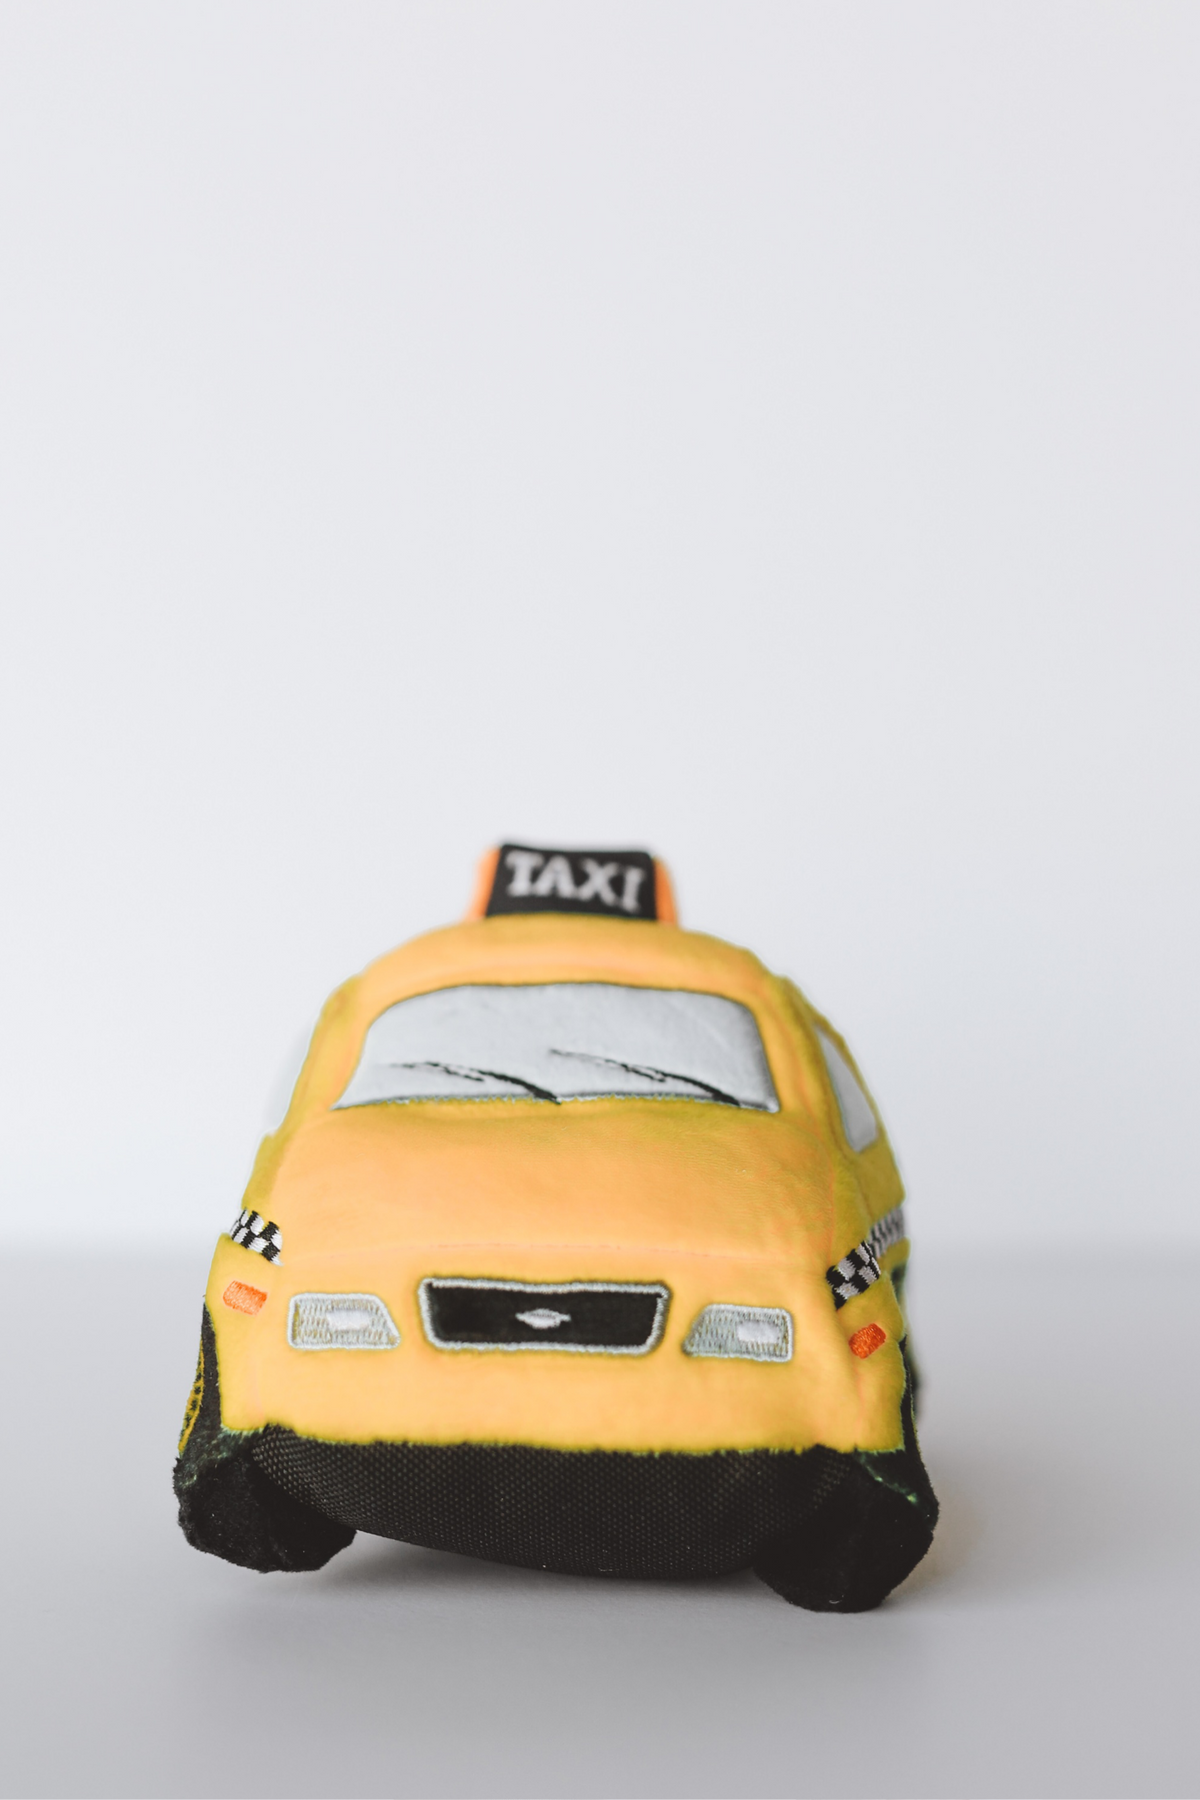 P.L.A.Y. Canine Commute Taxi Dog Toy